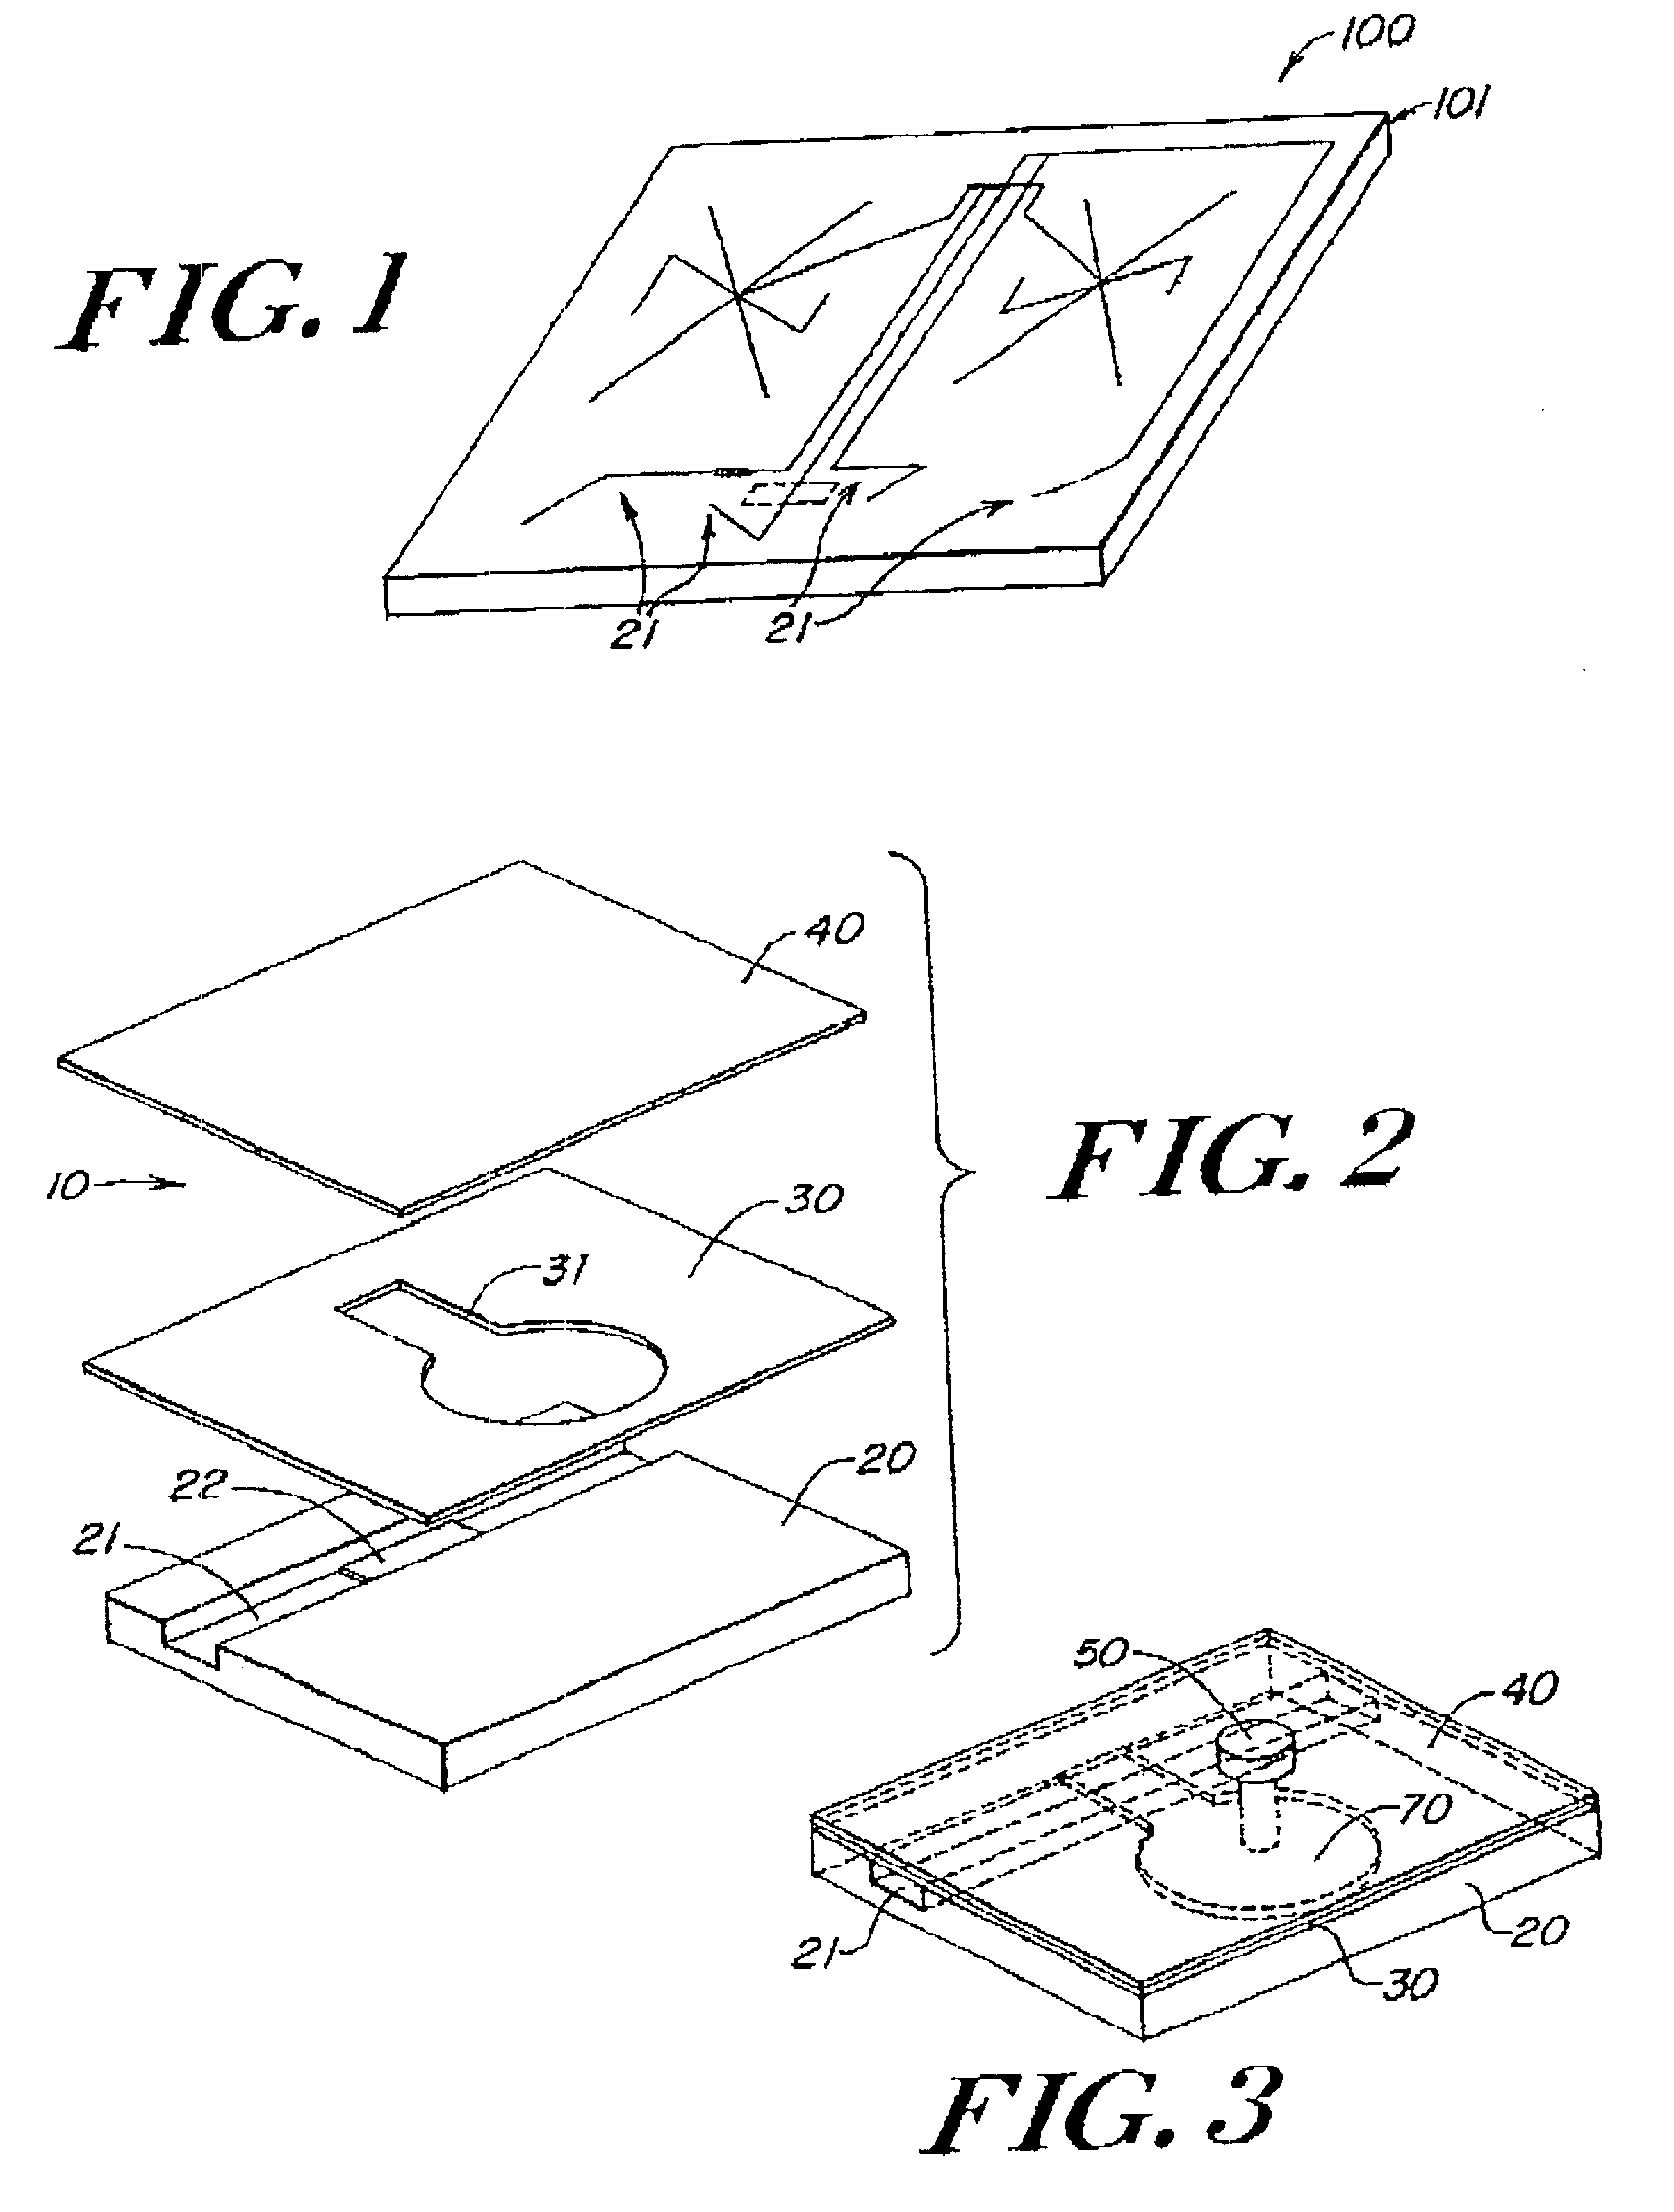 Microfluidic system including a bubble valve for regulating fluid flow through a microchannel